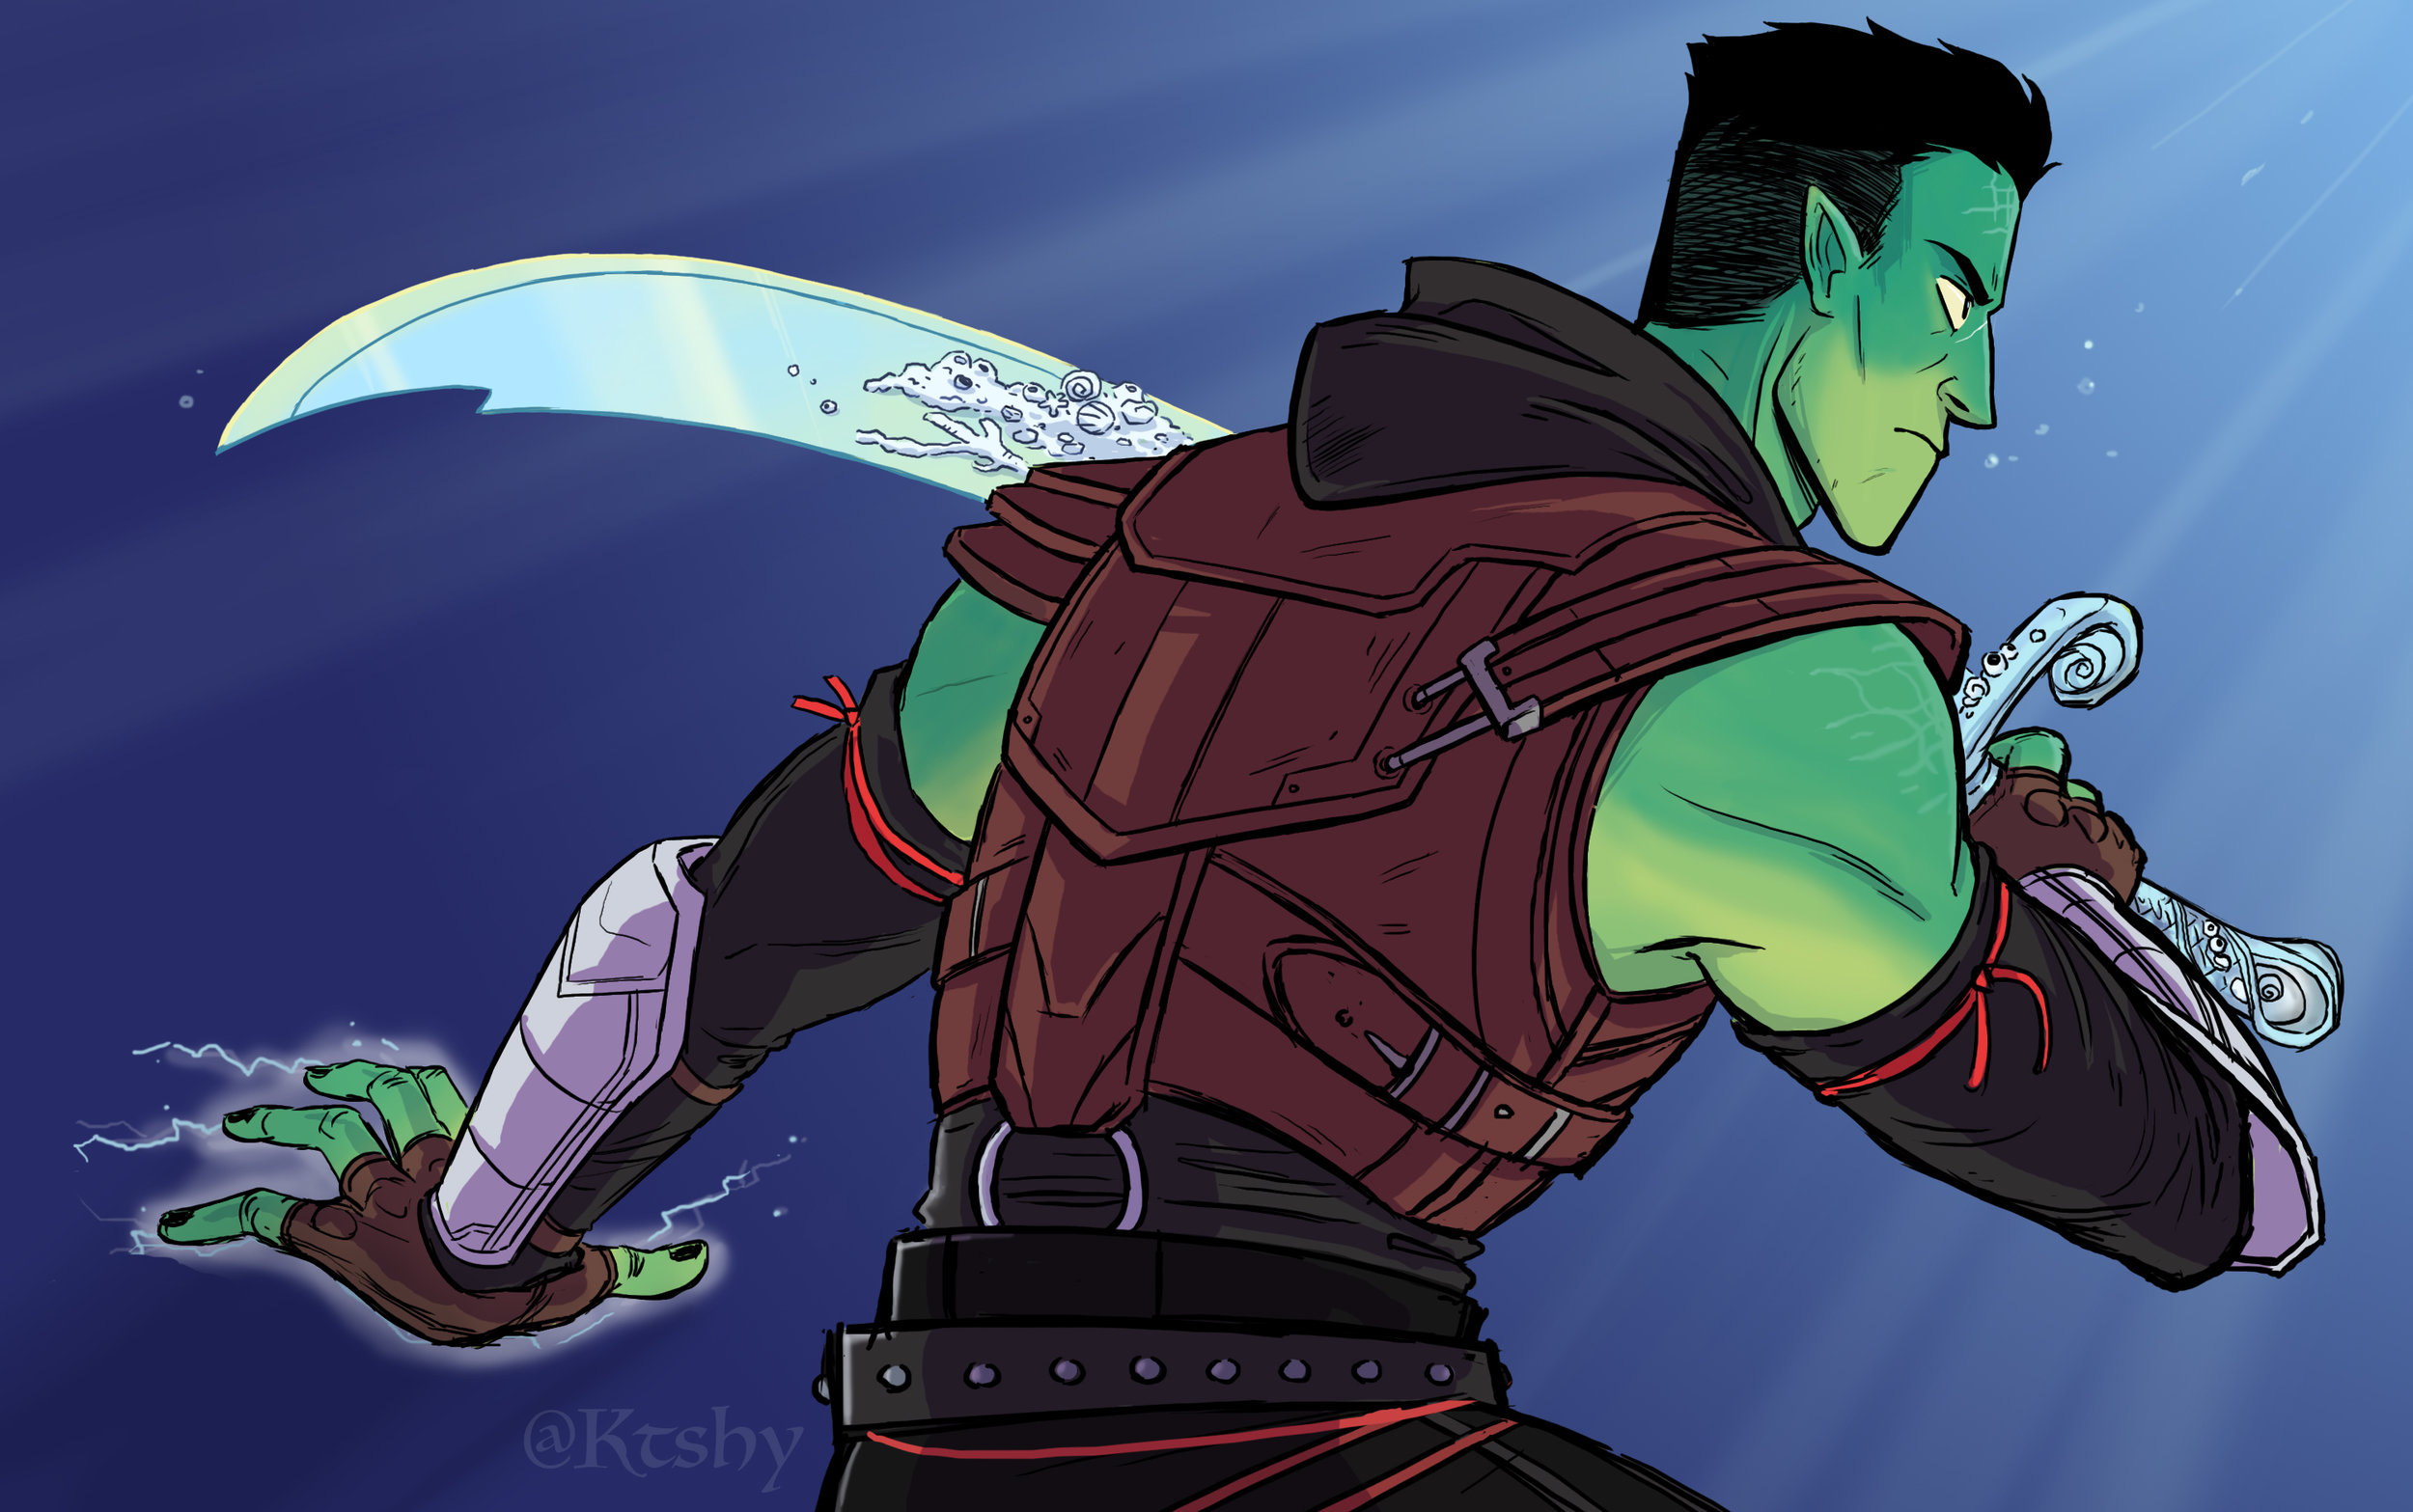  Fjord from Critical Role. 